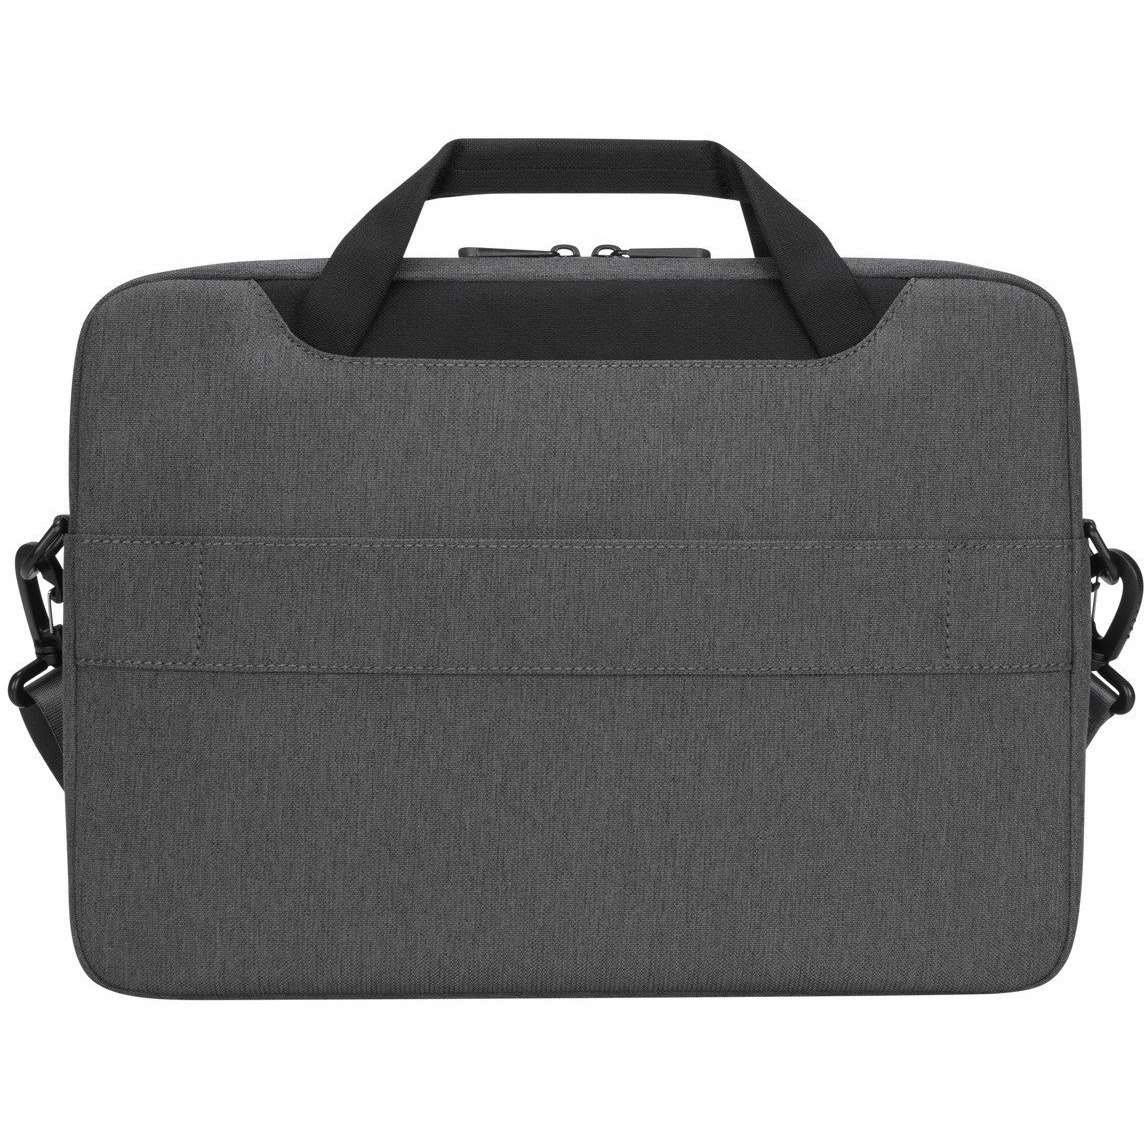 Targus Cypress TBS92602GL Carrying Case (Slipcase) for 33 cm (13") to 35.6 cm (14") Notebook - Grey